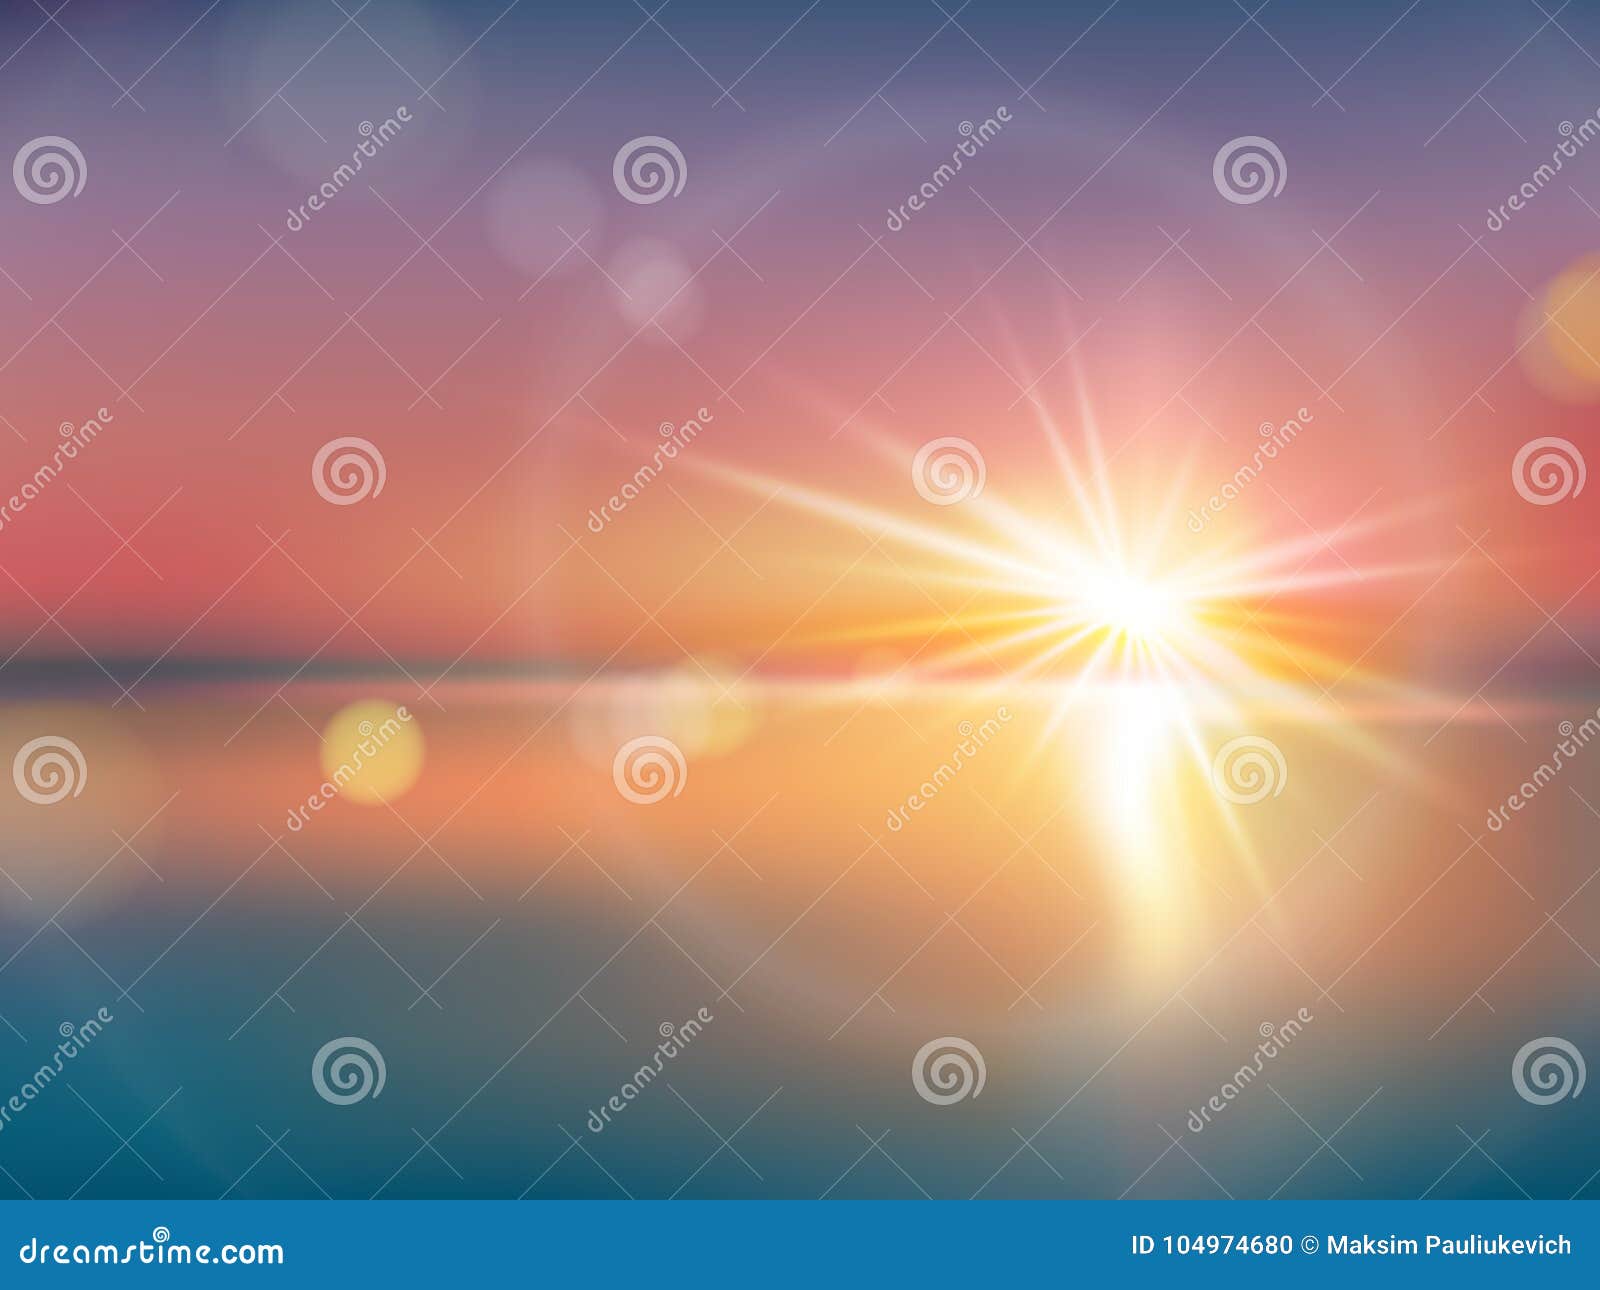 natural background with bright sunlight, with lens flare